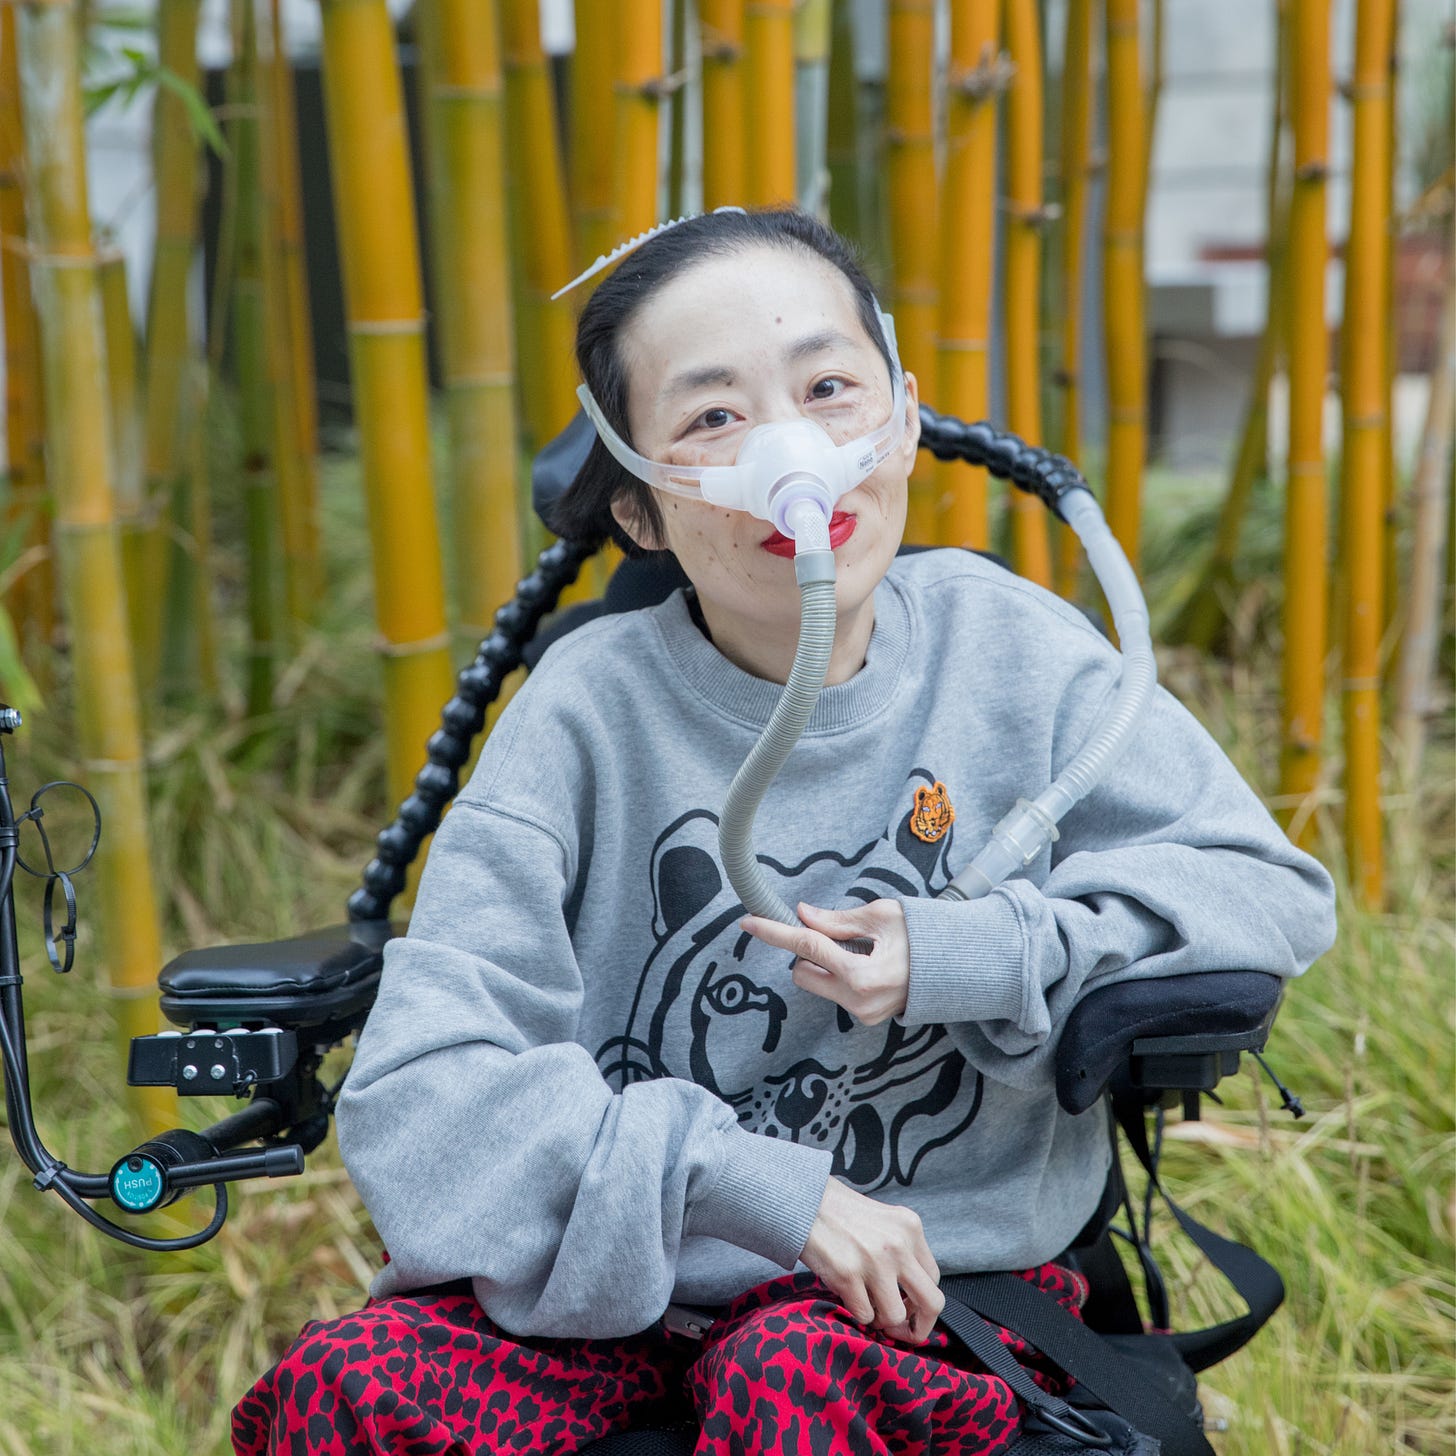 Photo of Alice Wong, an Asian American disabled woman with a mask over her nose attached to a tube for her ventilator. She is in a power wheelchair and wearing a gray sweatshirt with a tiger and leopard-print red and black pants. Behind her are bamboo trees. Credit: Eddie Hernandez Photography